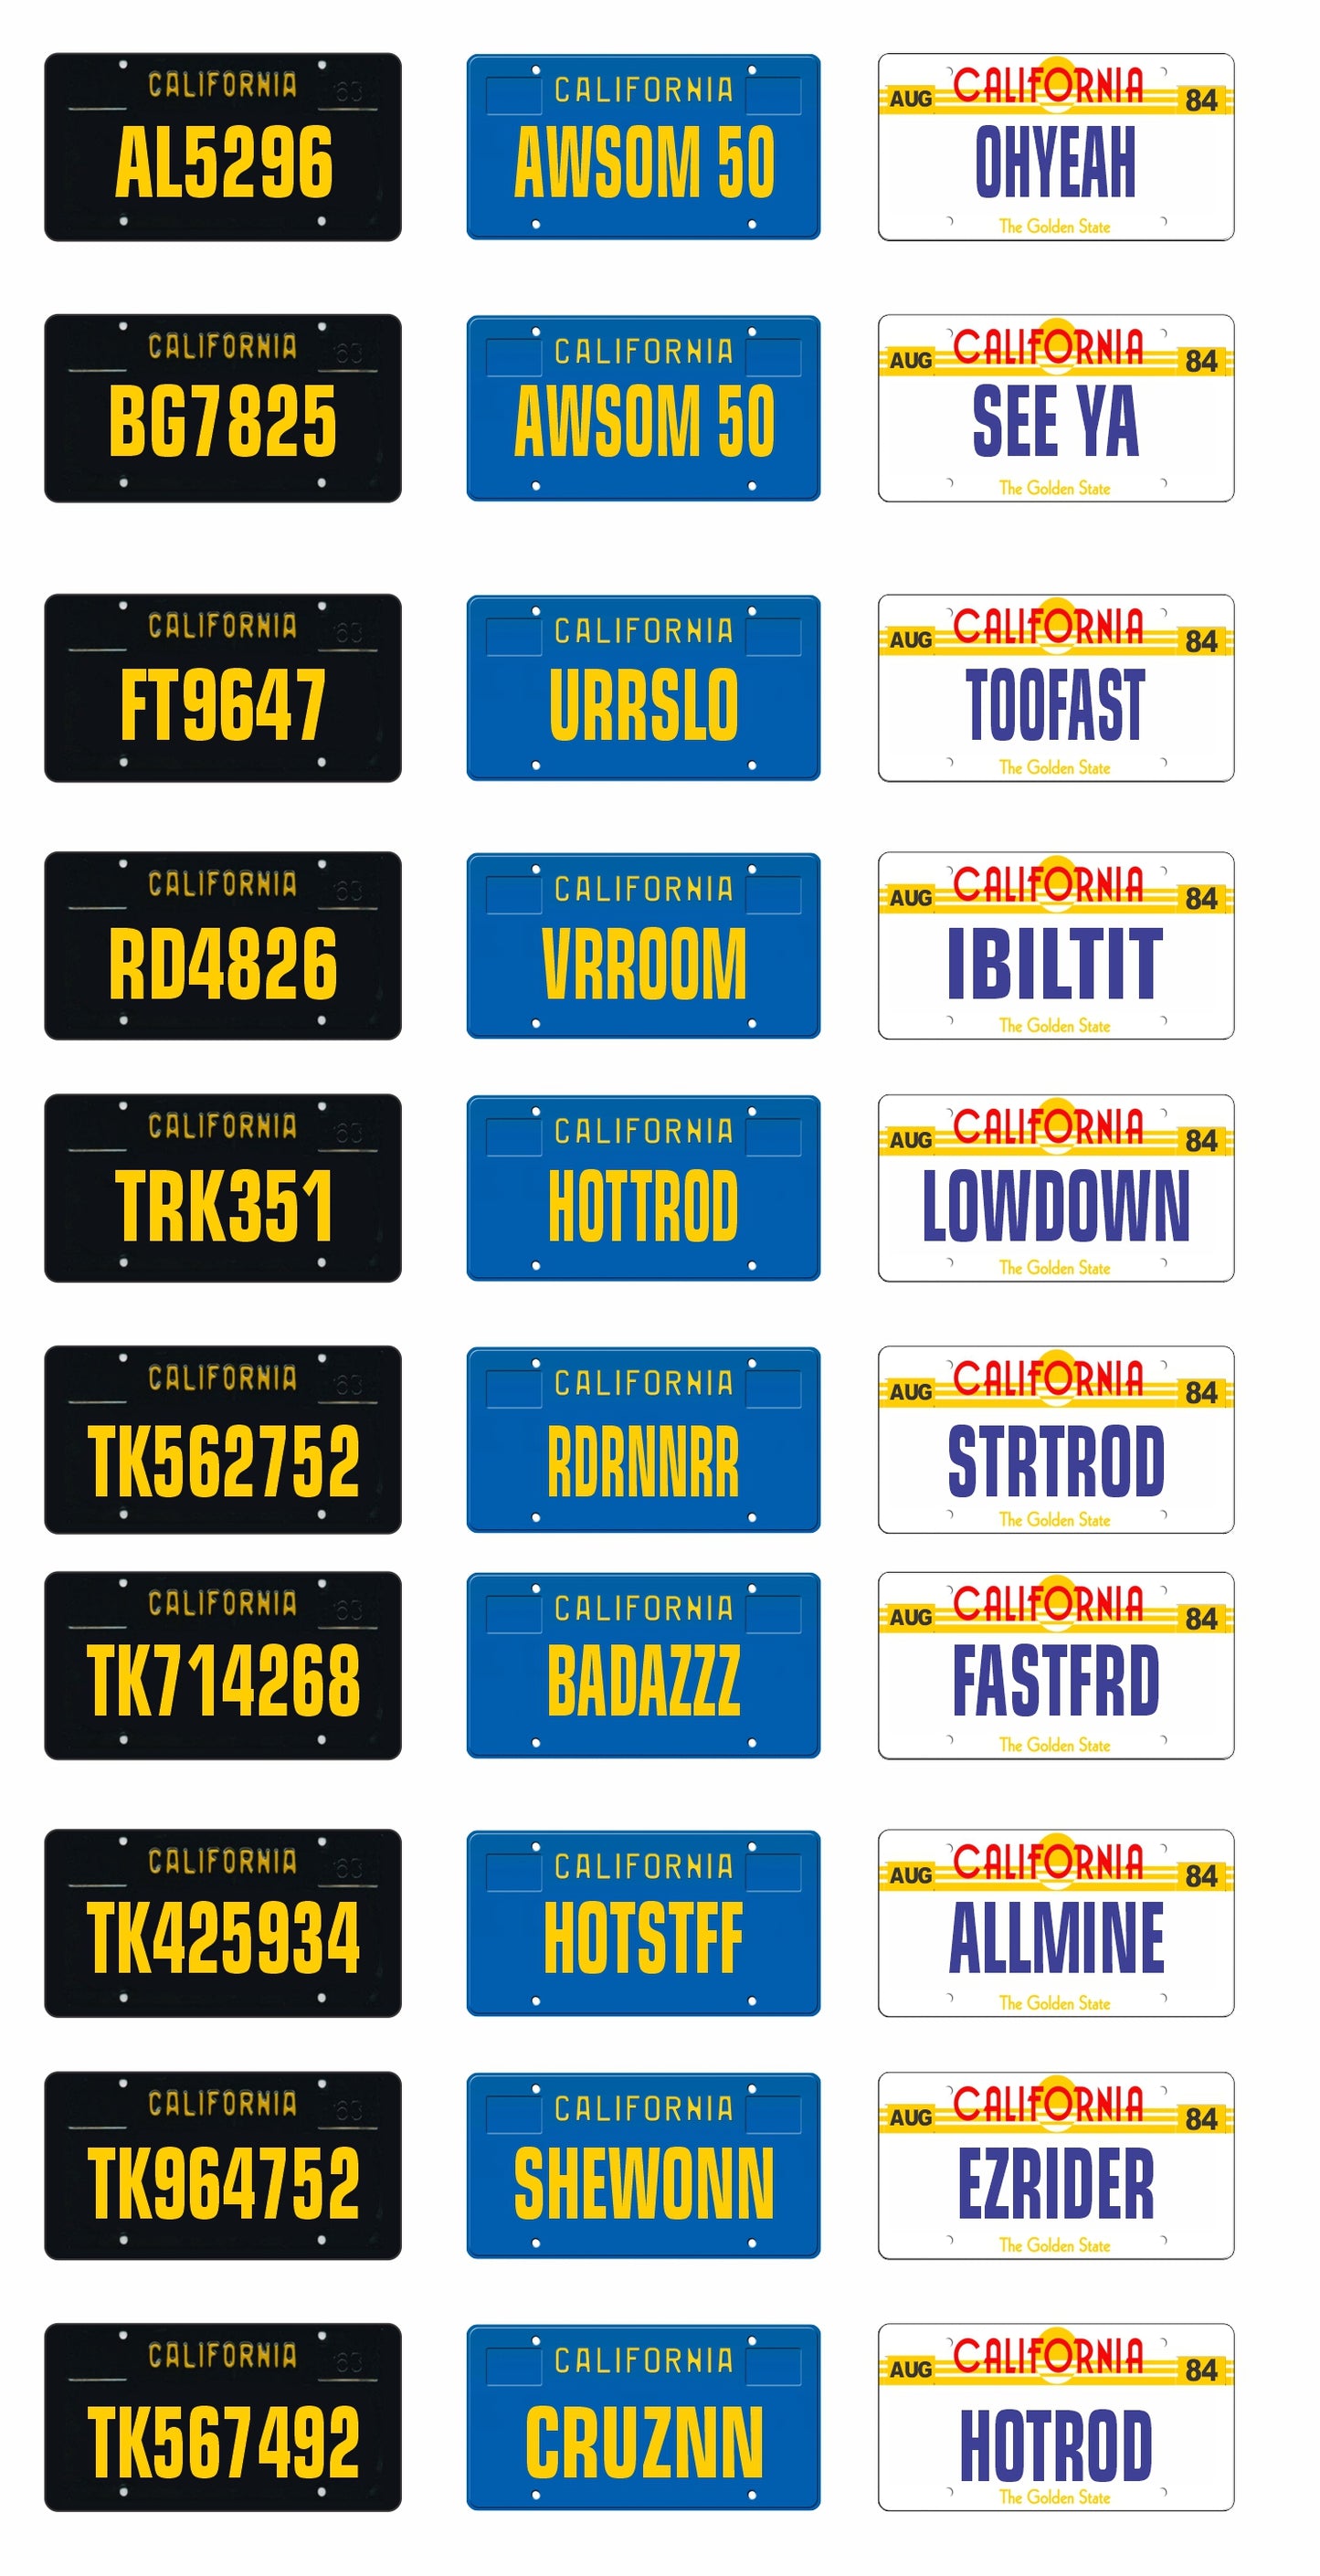 California License Plate Assortment for 1:24 1:25 scale models